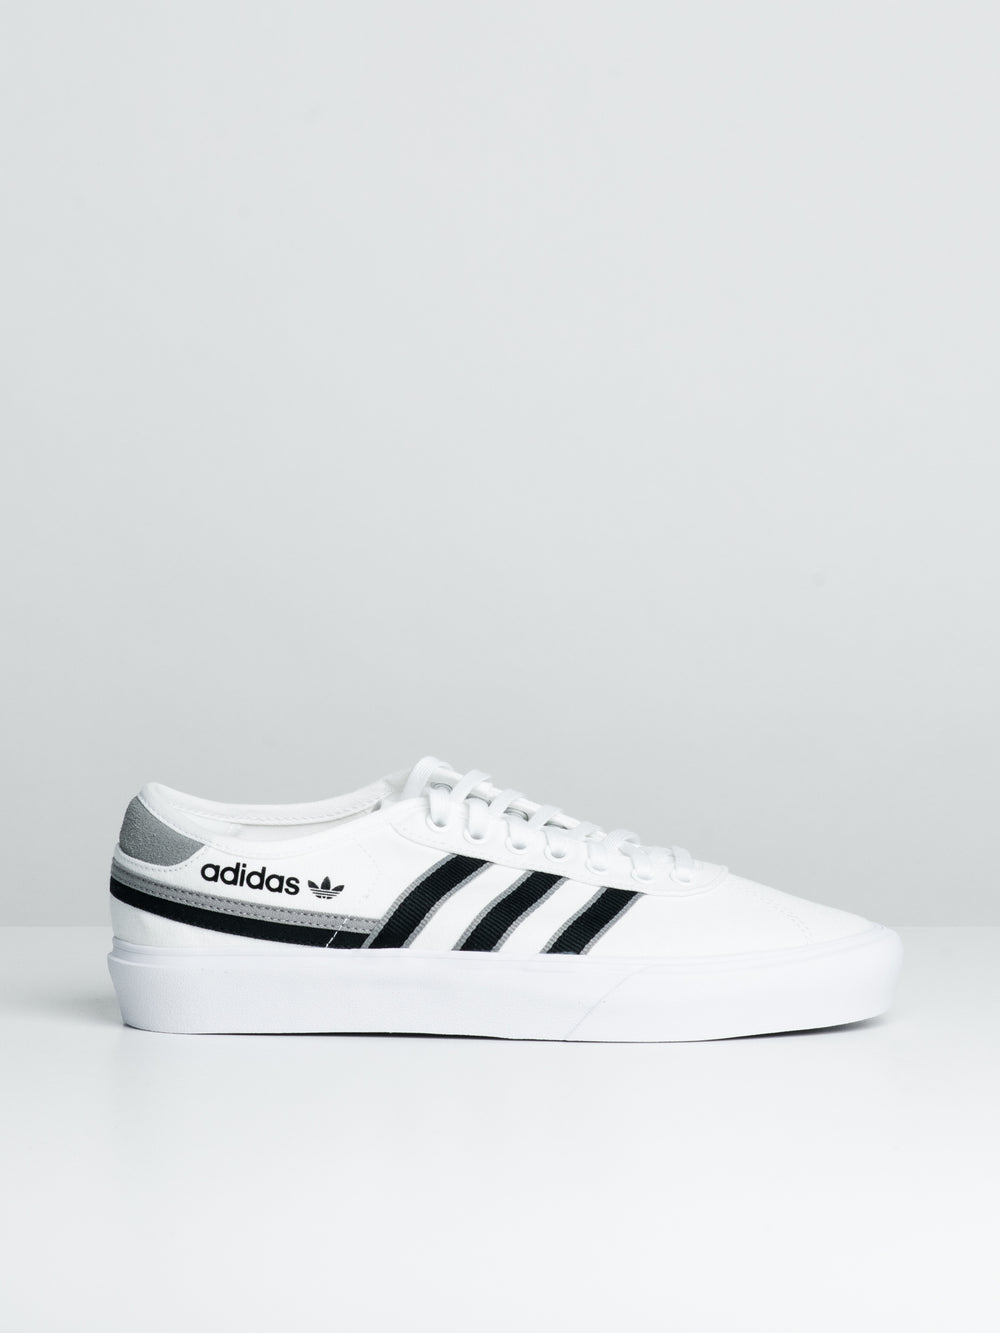 MENS ADIDAS DELPALA SNEAKERS- WHITE - CLEARANCE